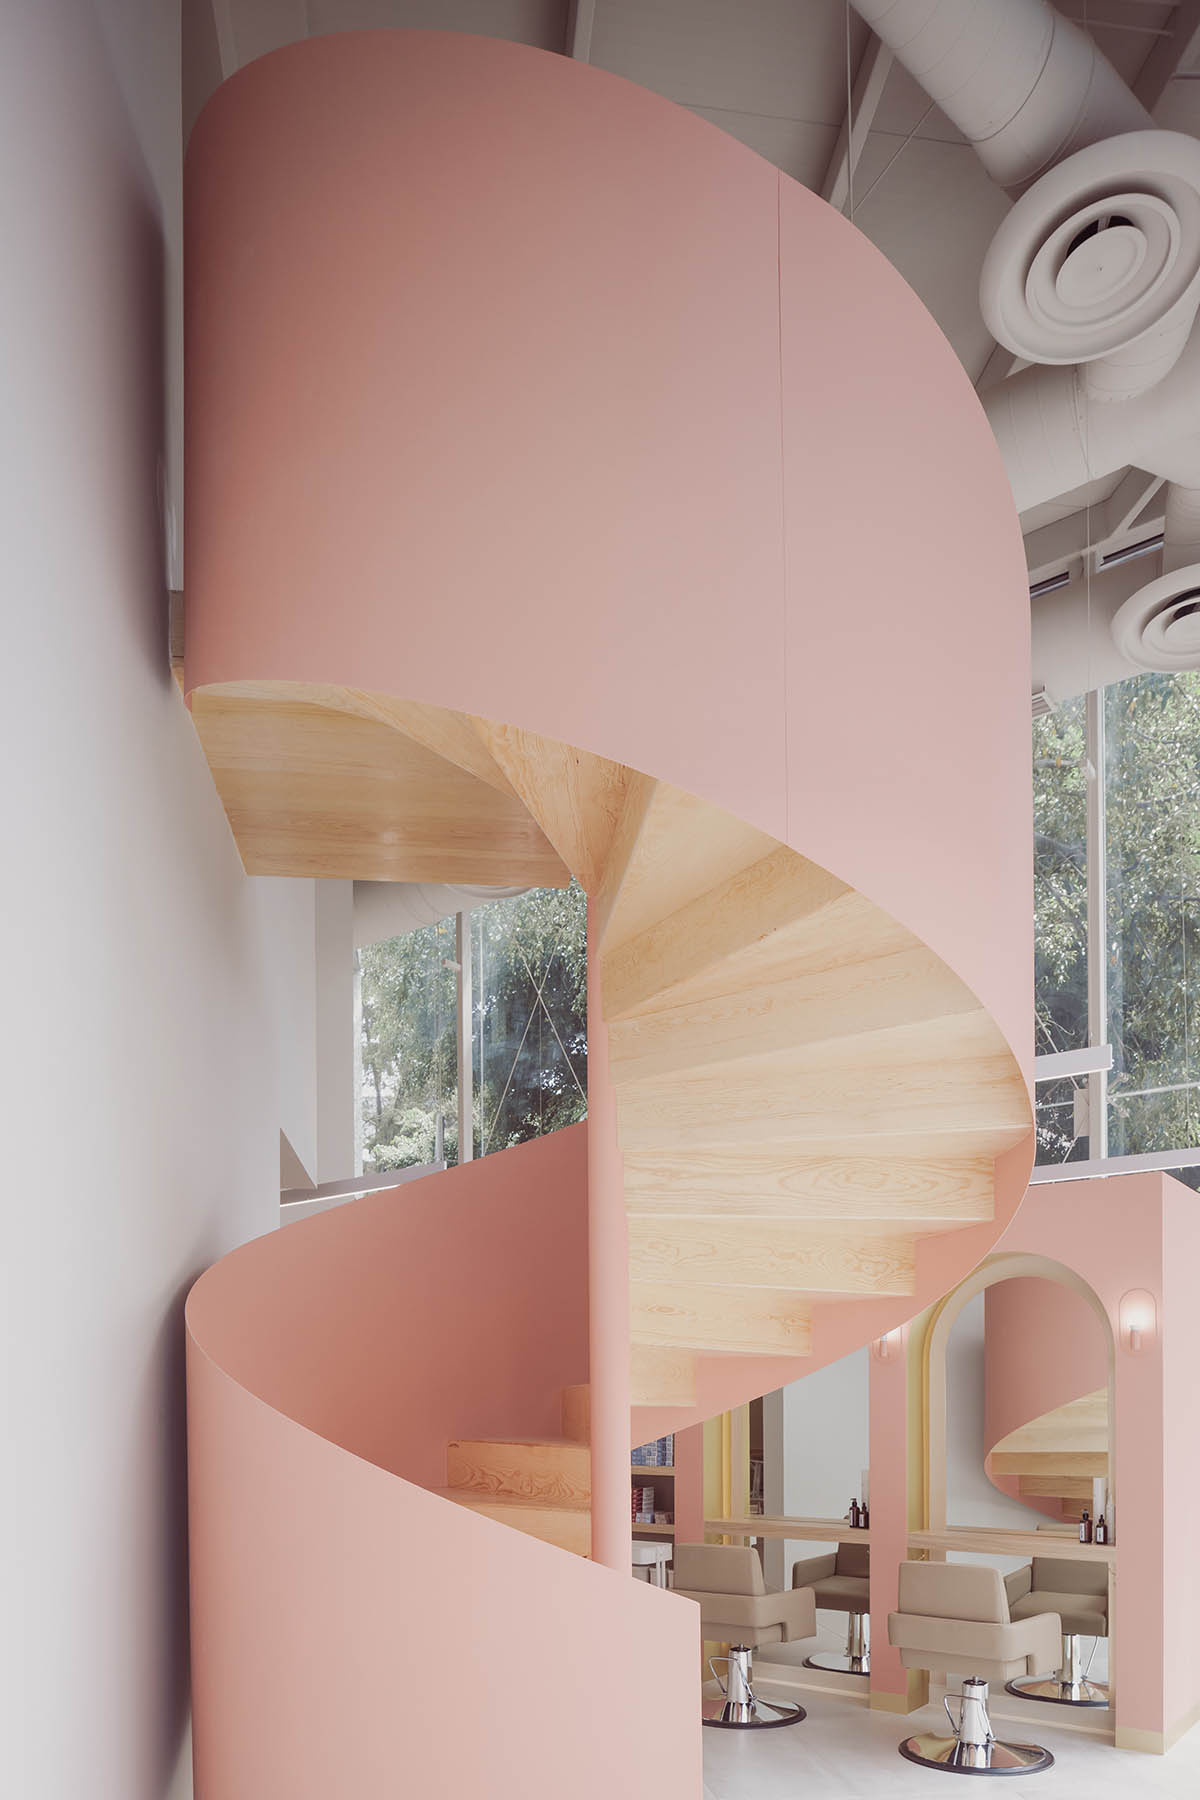 VOID Studio amplifies the mechanism of work with soft pinkish staircase and cabin-like stations